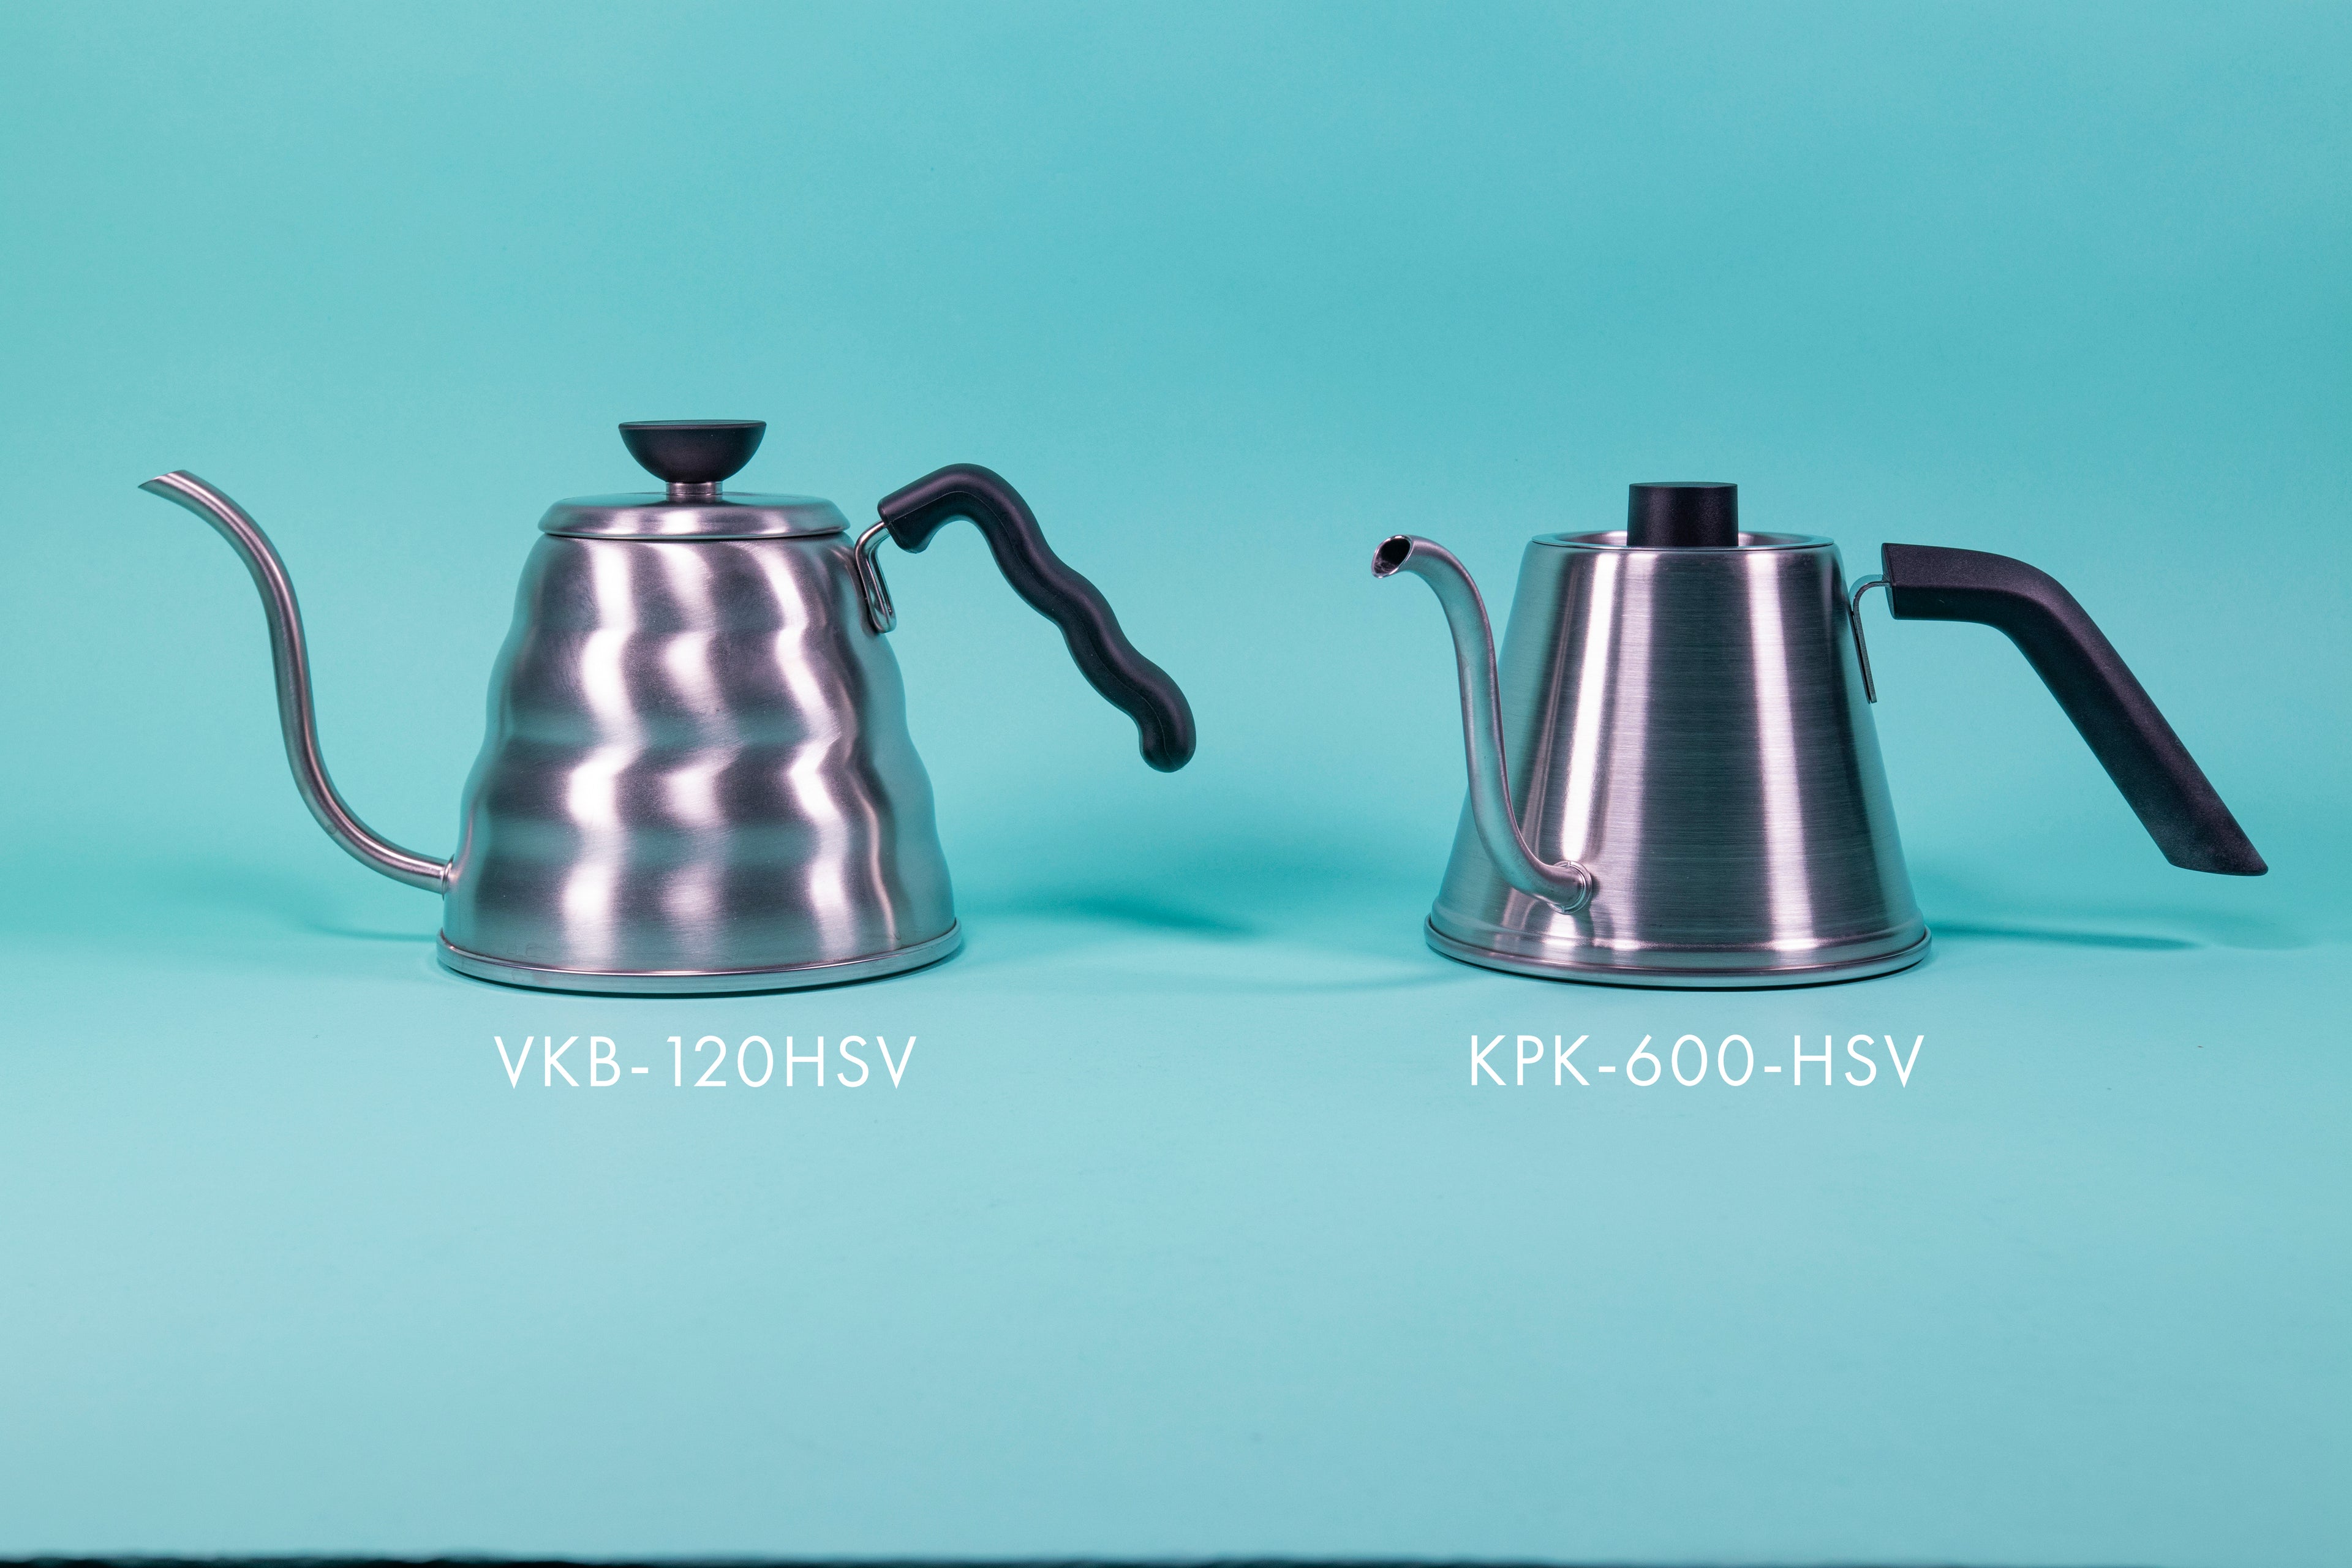 A beehive-shaped silver stainless steel handle with black plastic wave-shaped handle and black plastic lid knob with flat top beside a silver stainless steel kettle with black plastic handle and short cylindrical black plastic lid knob set against a blue background.